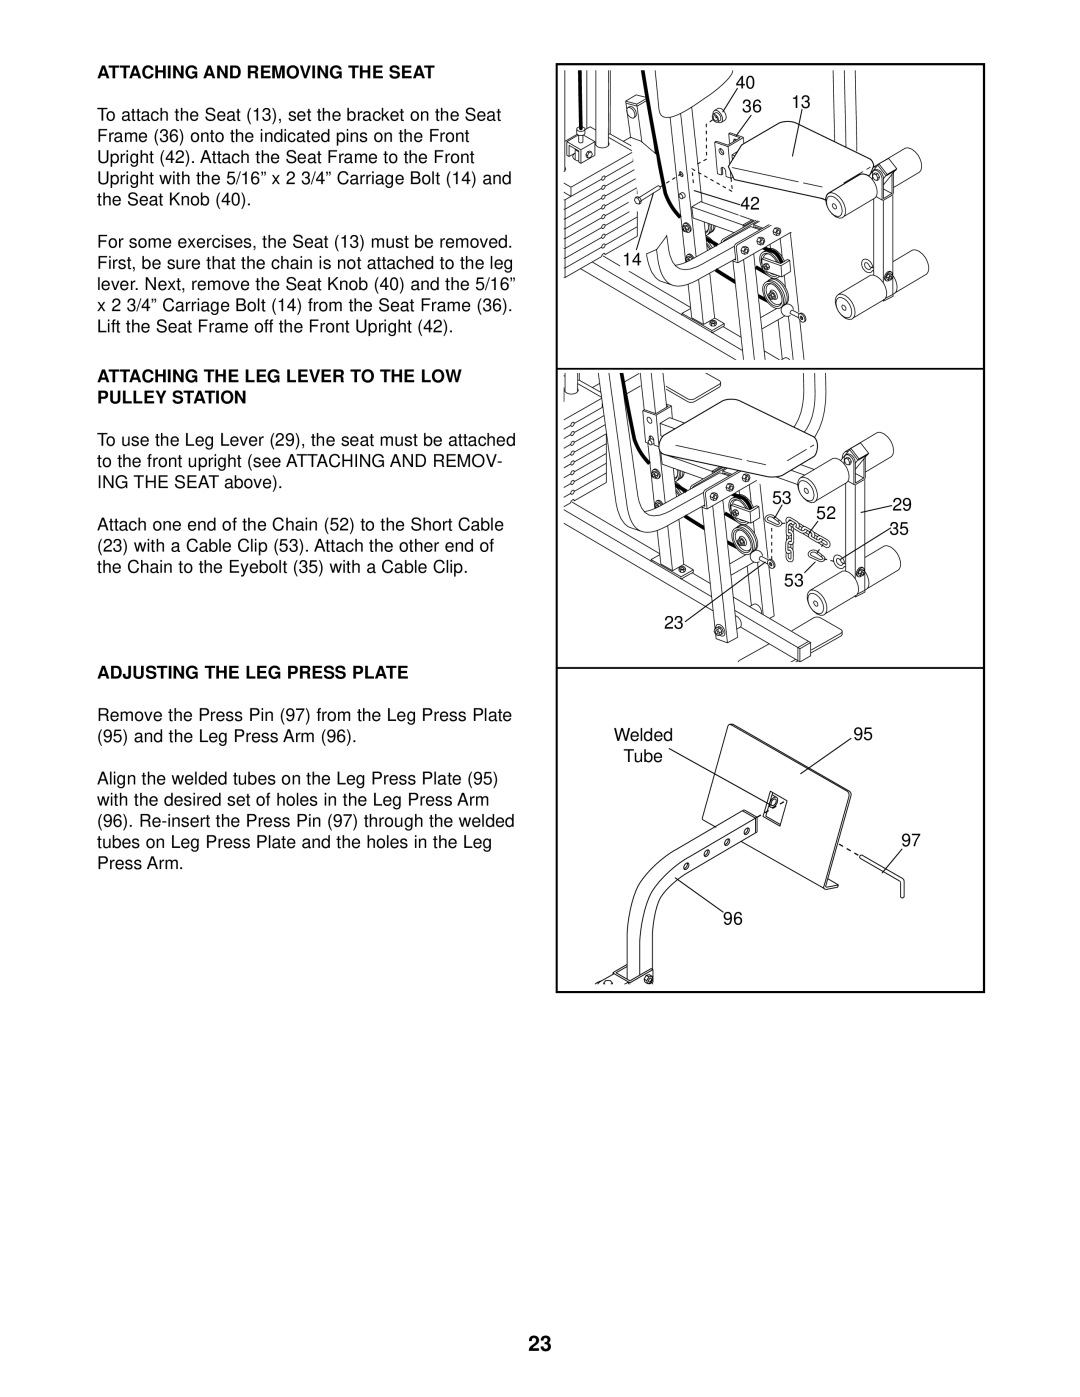 Weider WESY96400 user manual Attaching And Removing The Seat, Attaching The Leg Lever To The Low Pulley Station 